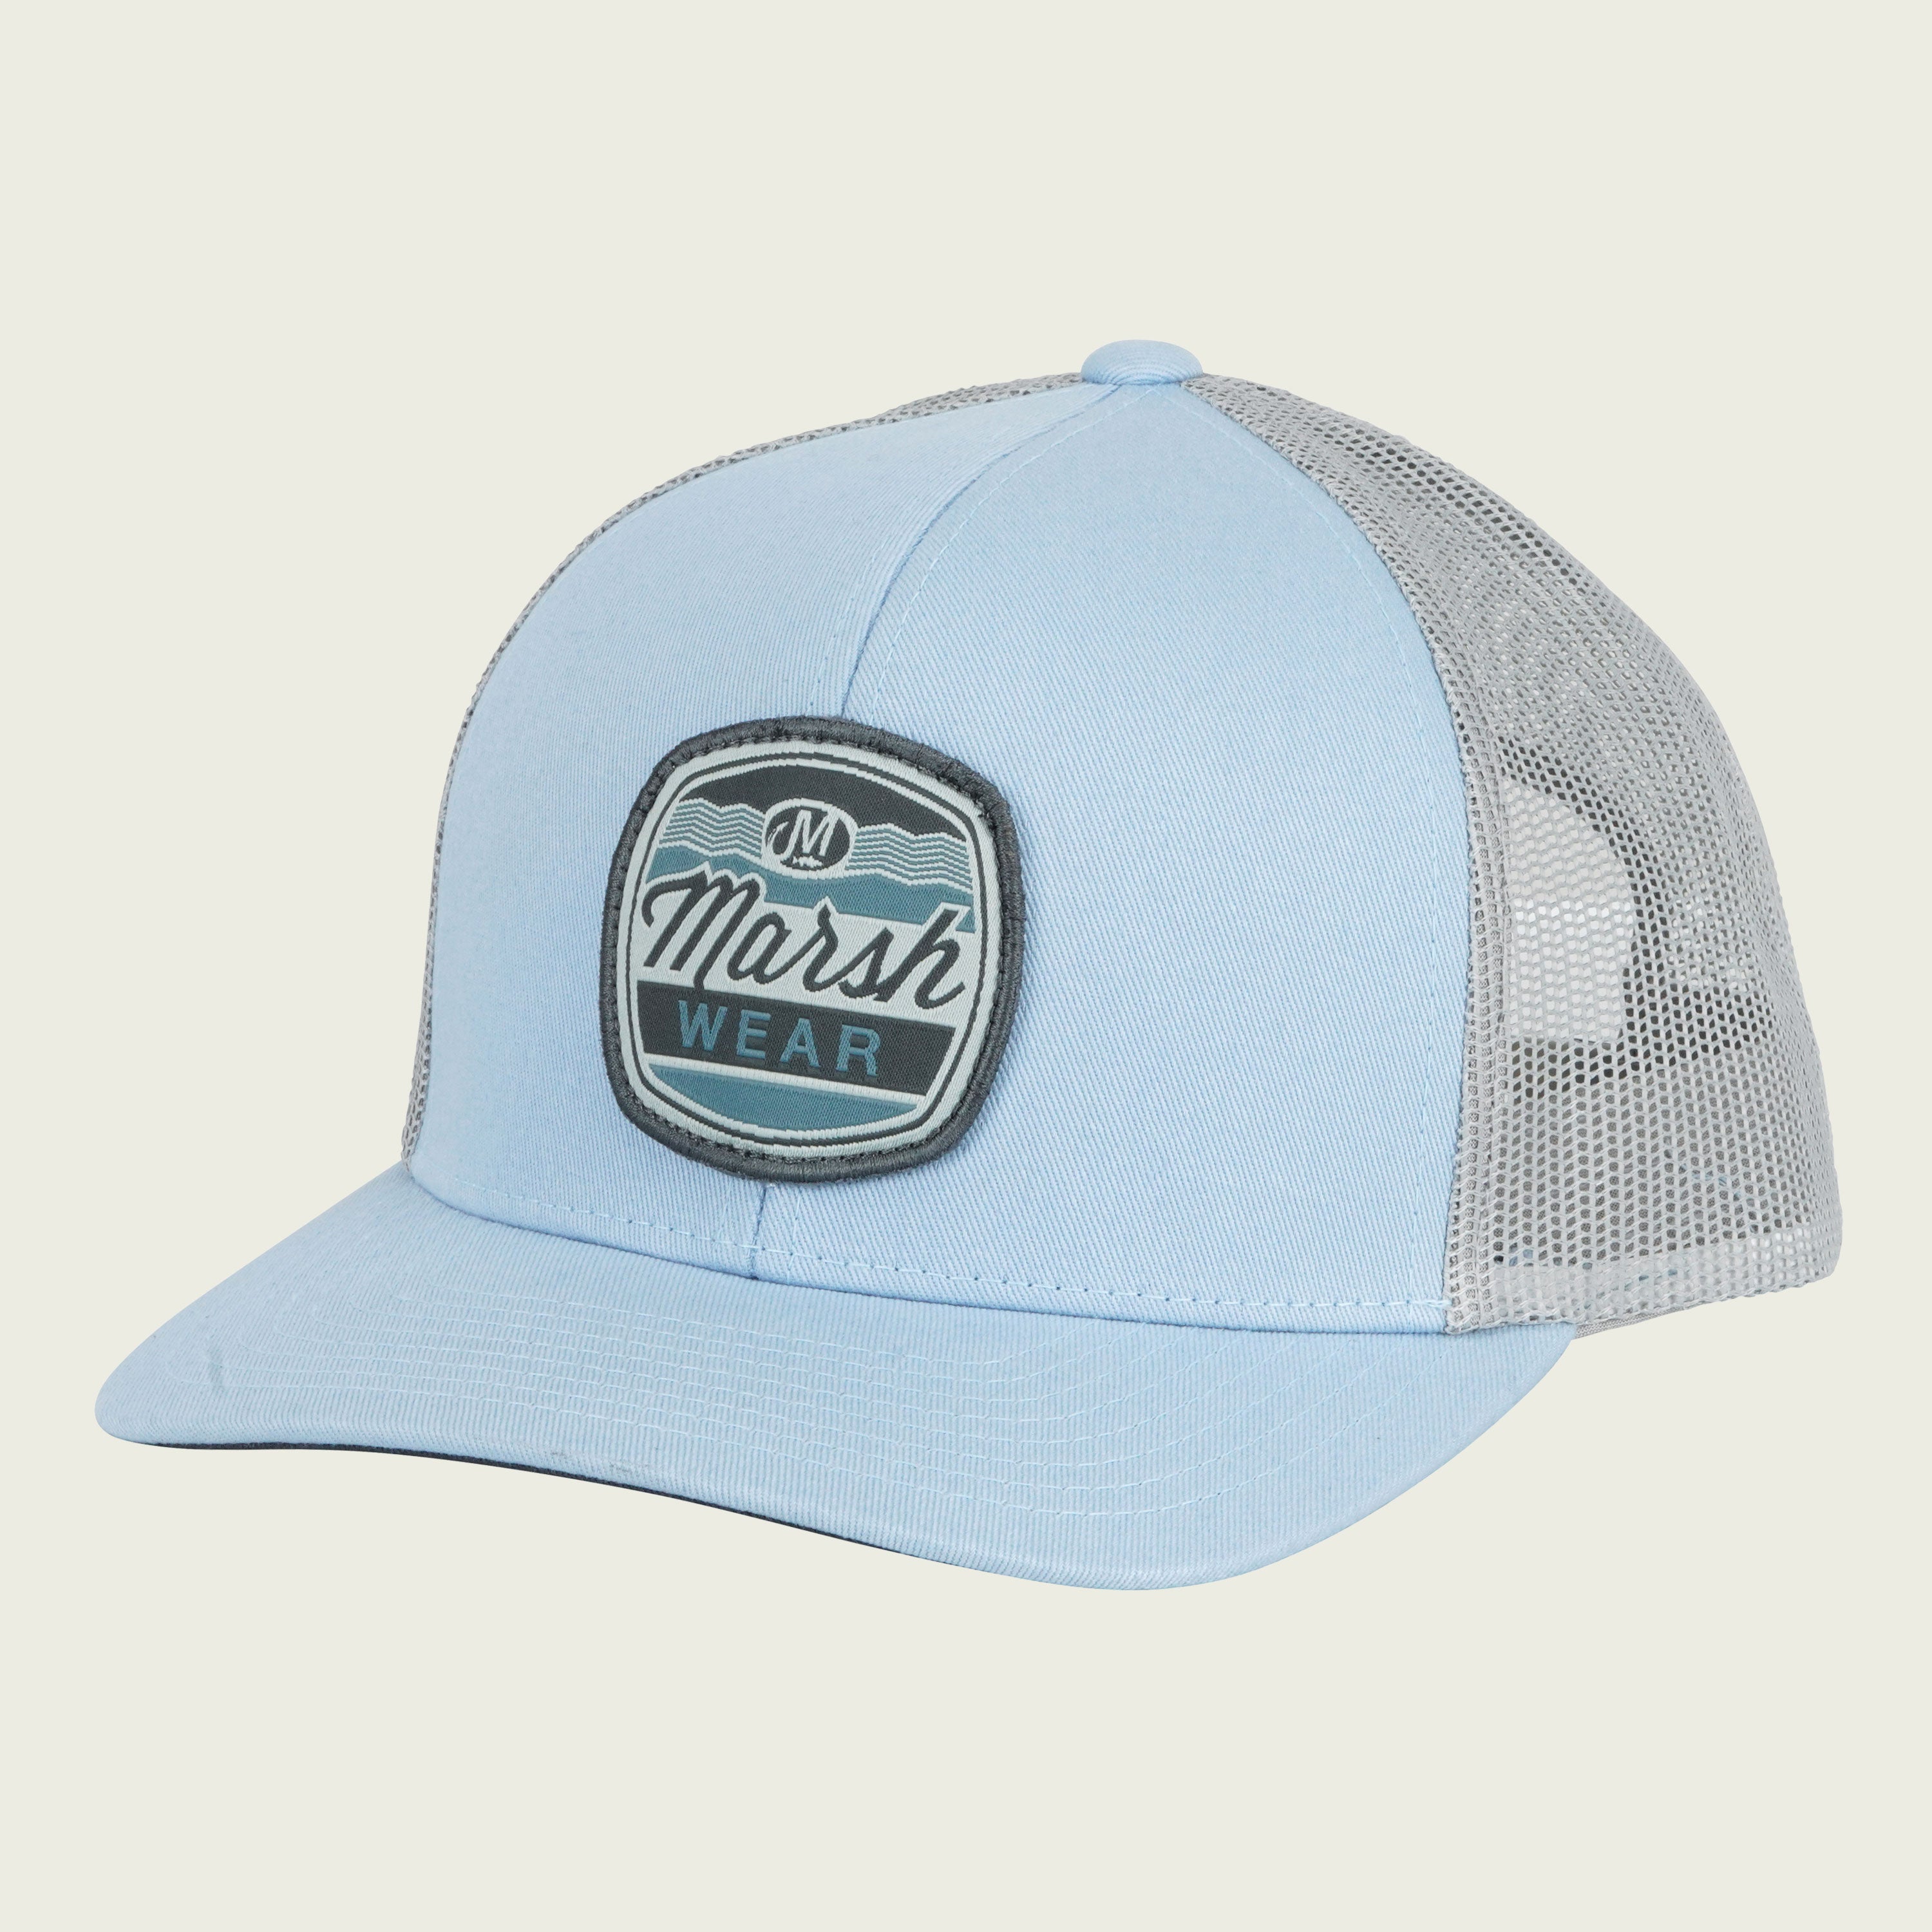 New Hats & T-Shirts For Spring – Marsh Wear Clothing